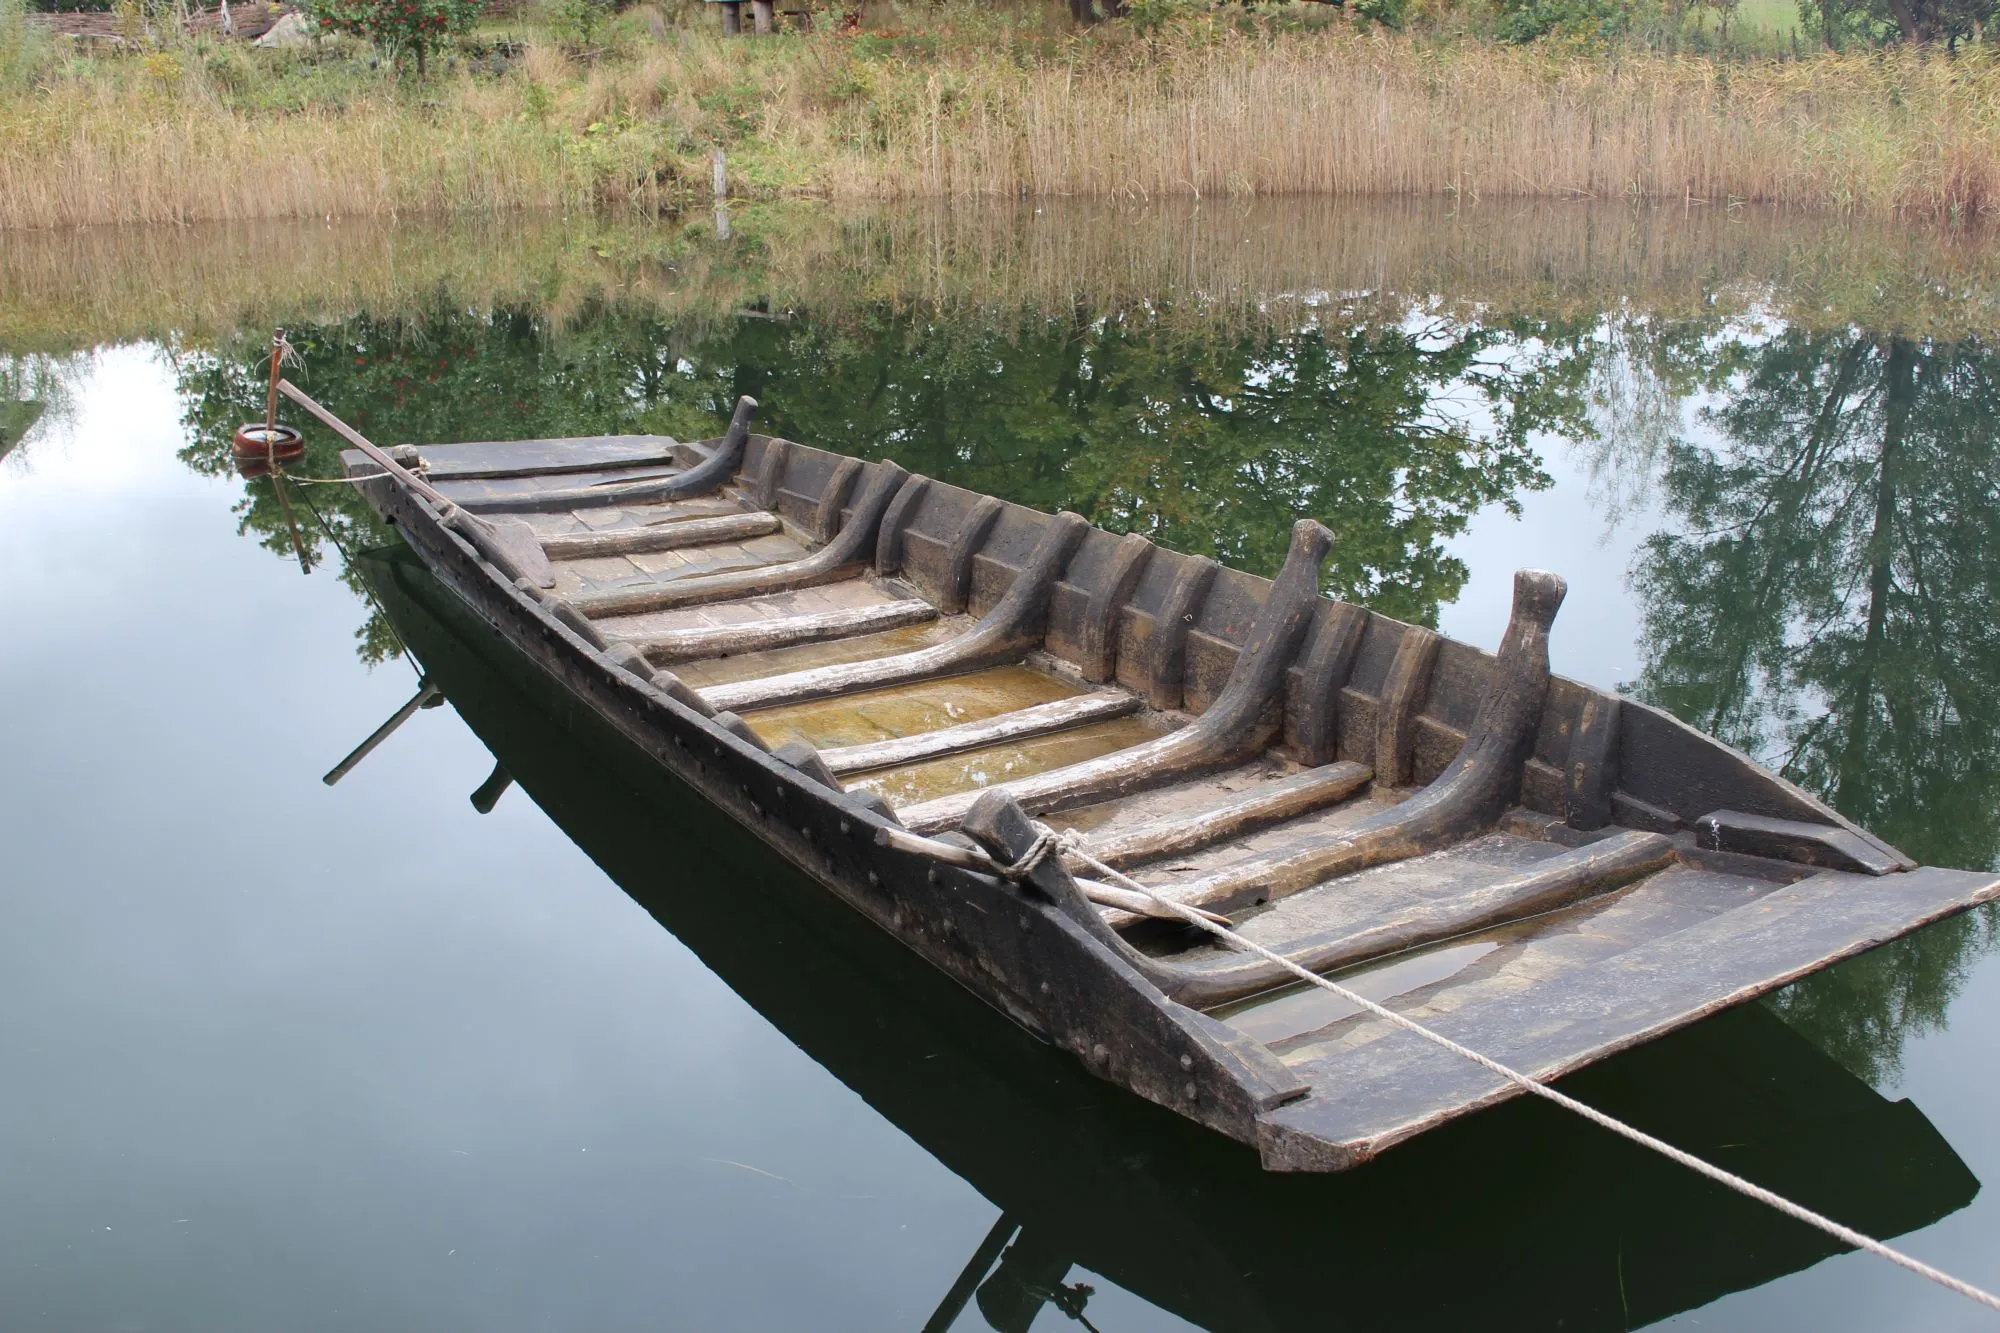 Photo showing: The Egernsund-barge found in 1966 in Southern Jutland. This is a reconstruction seen at Middelaldercentret at Nykøbing Falster, Denmark